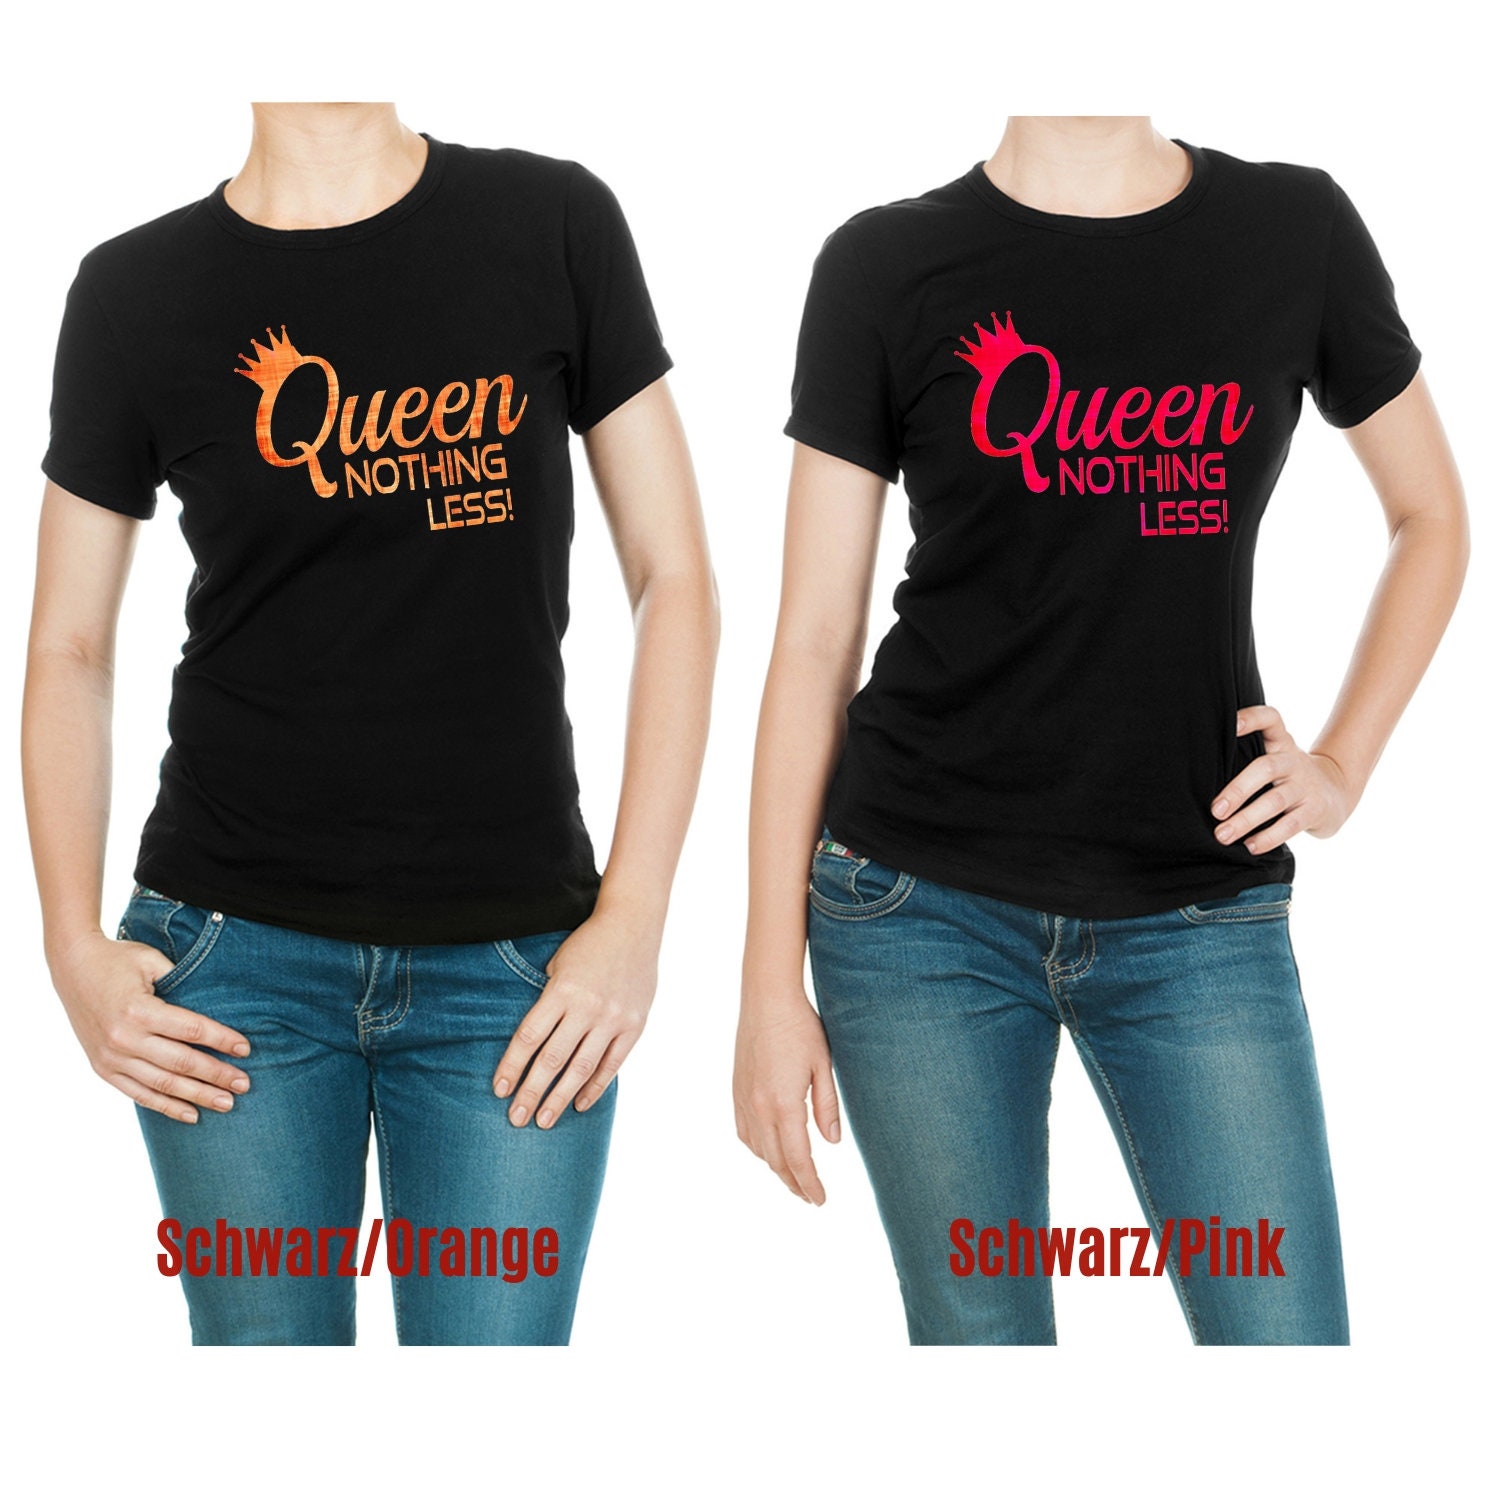 The perfect Statement for real Power Women. QUEEN-NOTHING Less T-Shirt with Saying